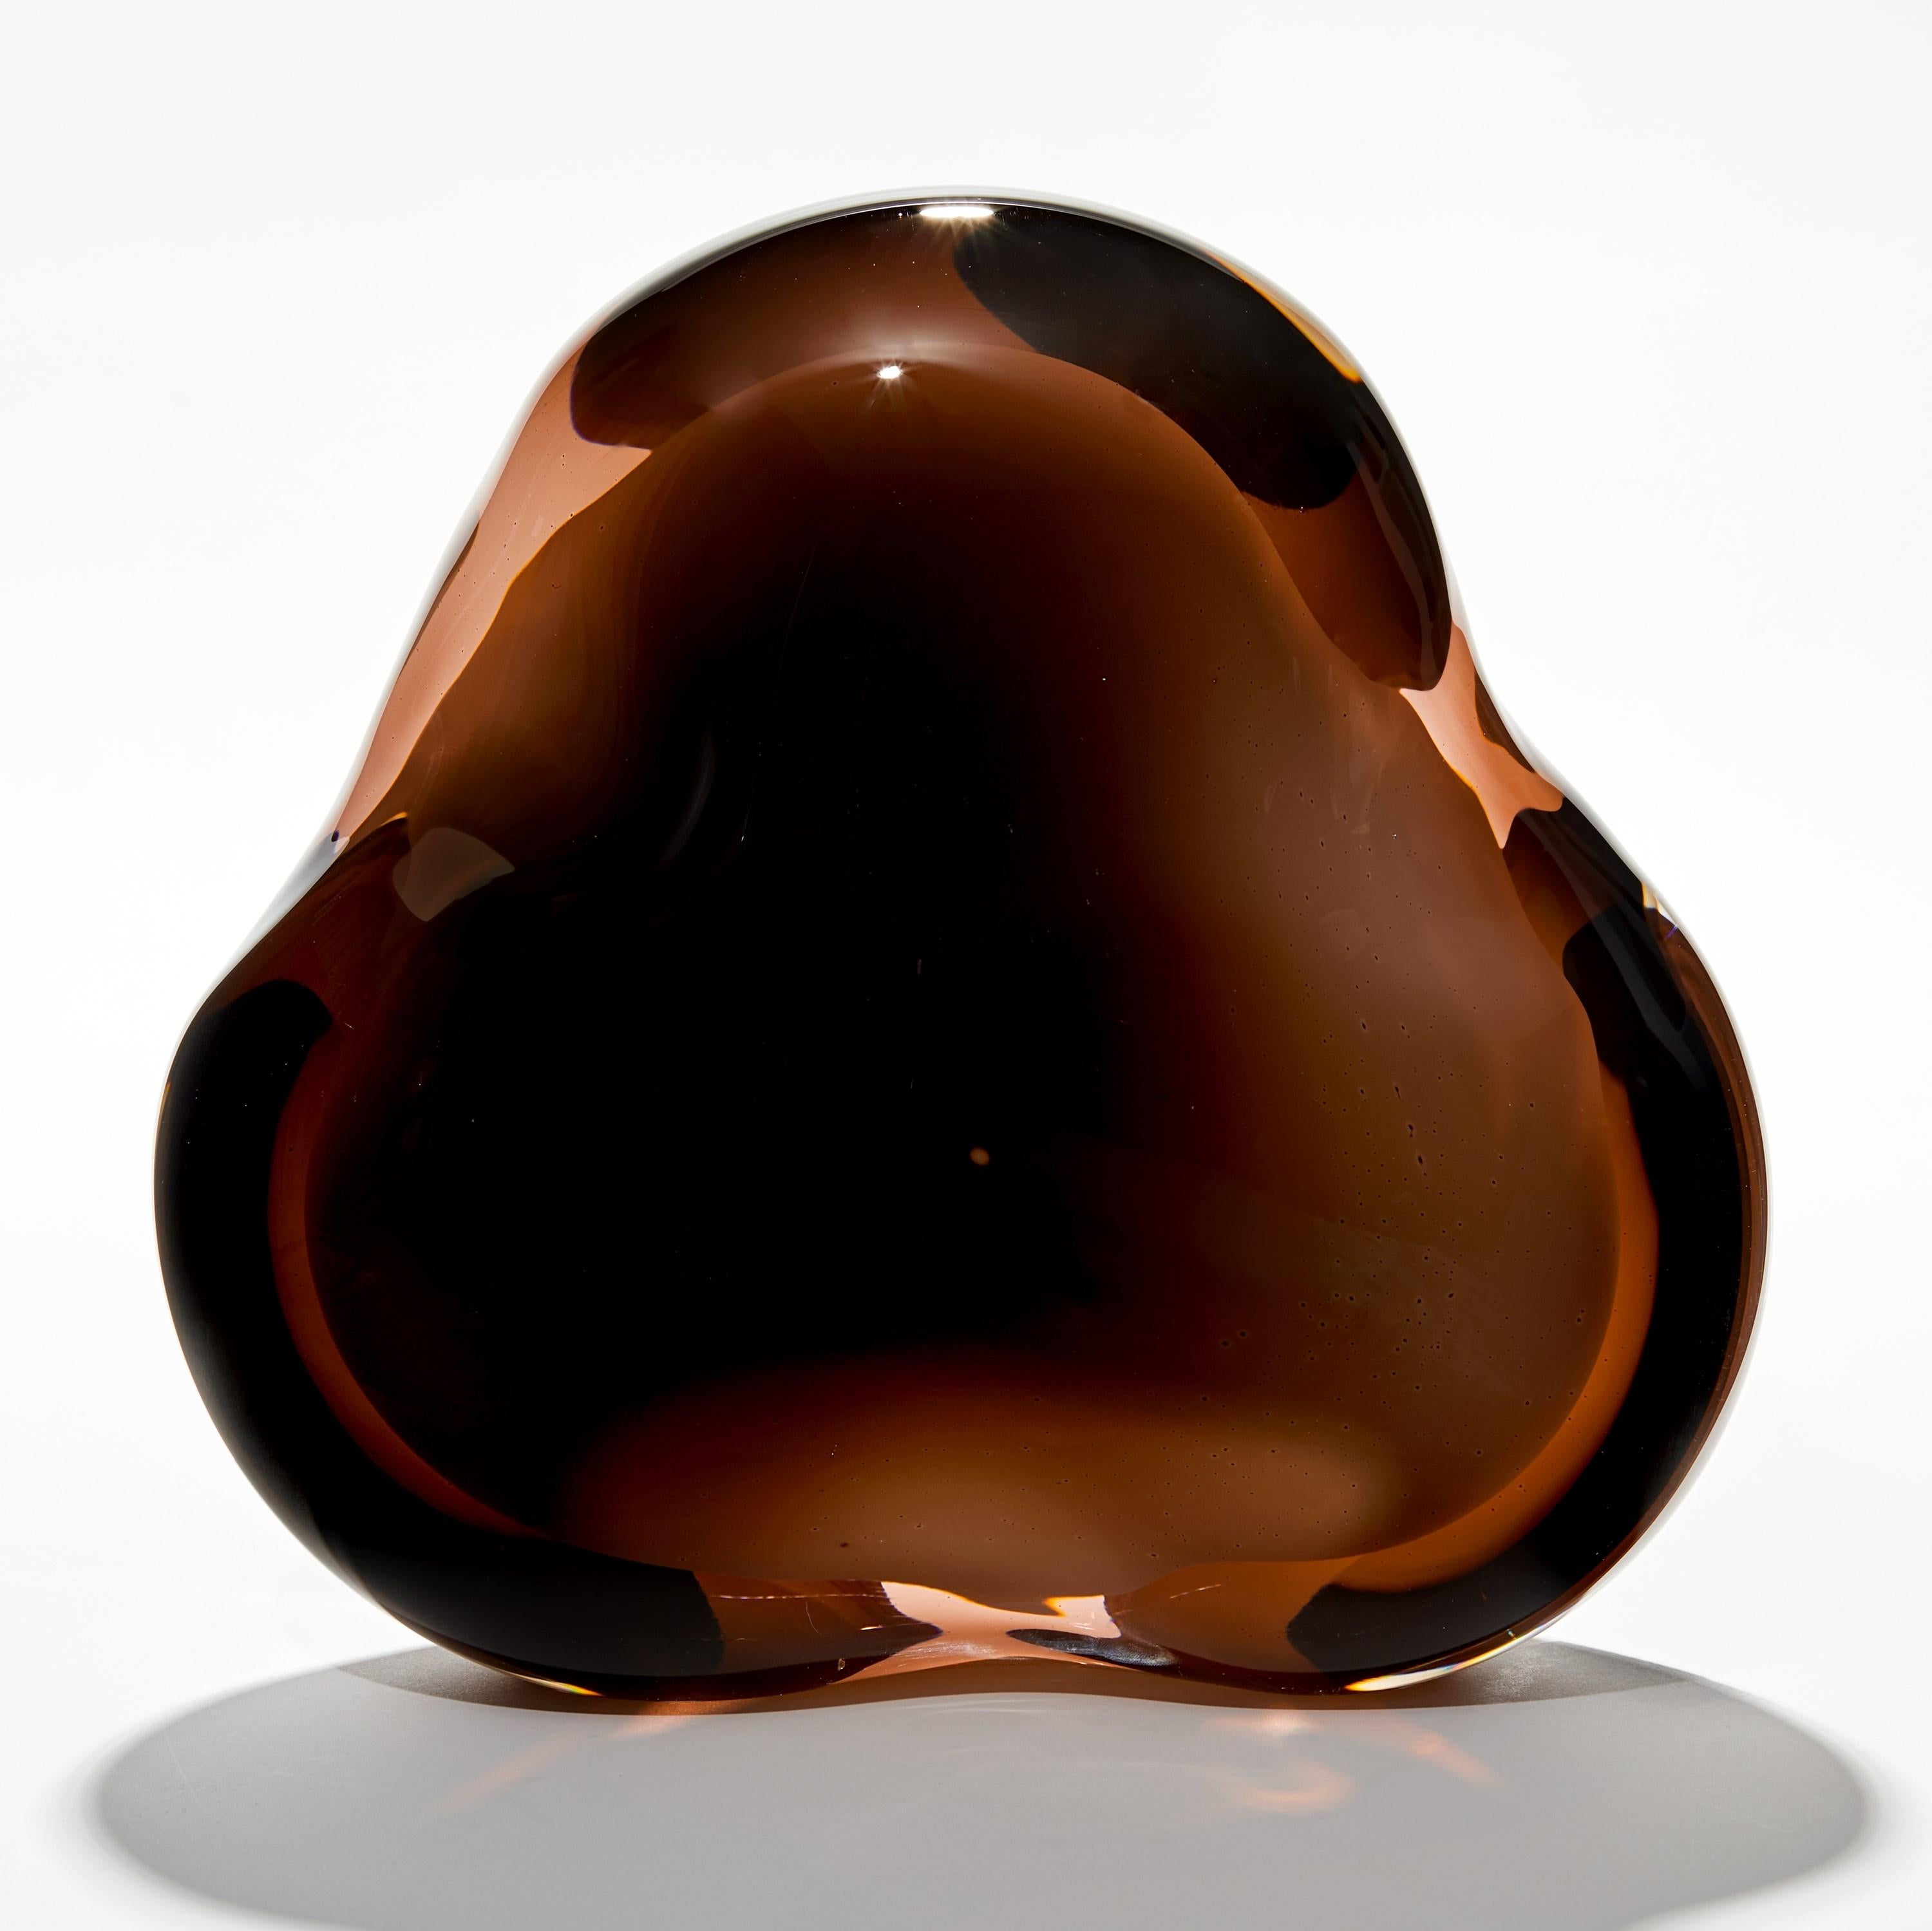 Organic Modern Chromatic Vug in Dark Amber to Olive, Glass Sculpture by Samantha Donaldson For Sale